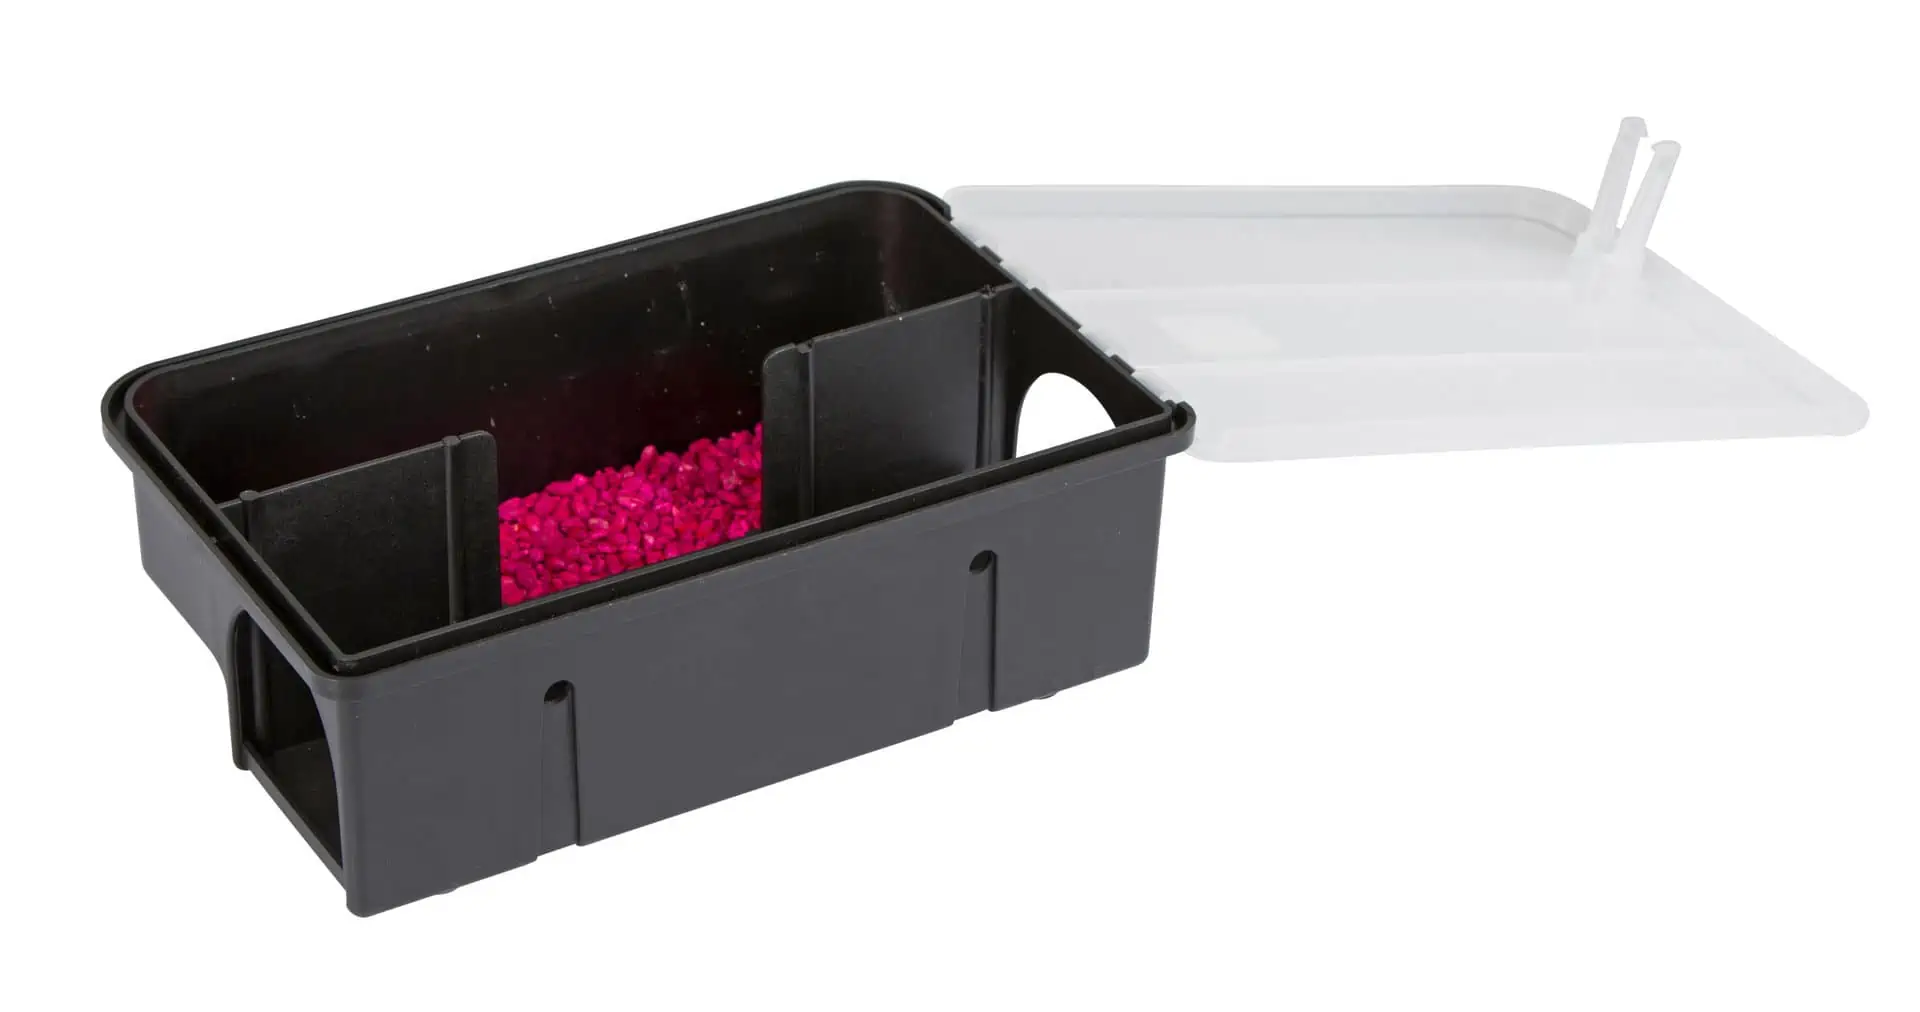 Bait station JERRY for mice 22 x 13,7 x 7,6 cm